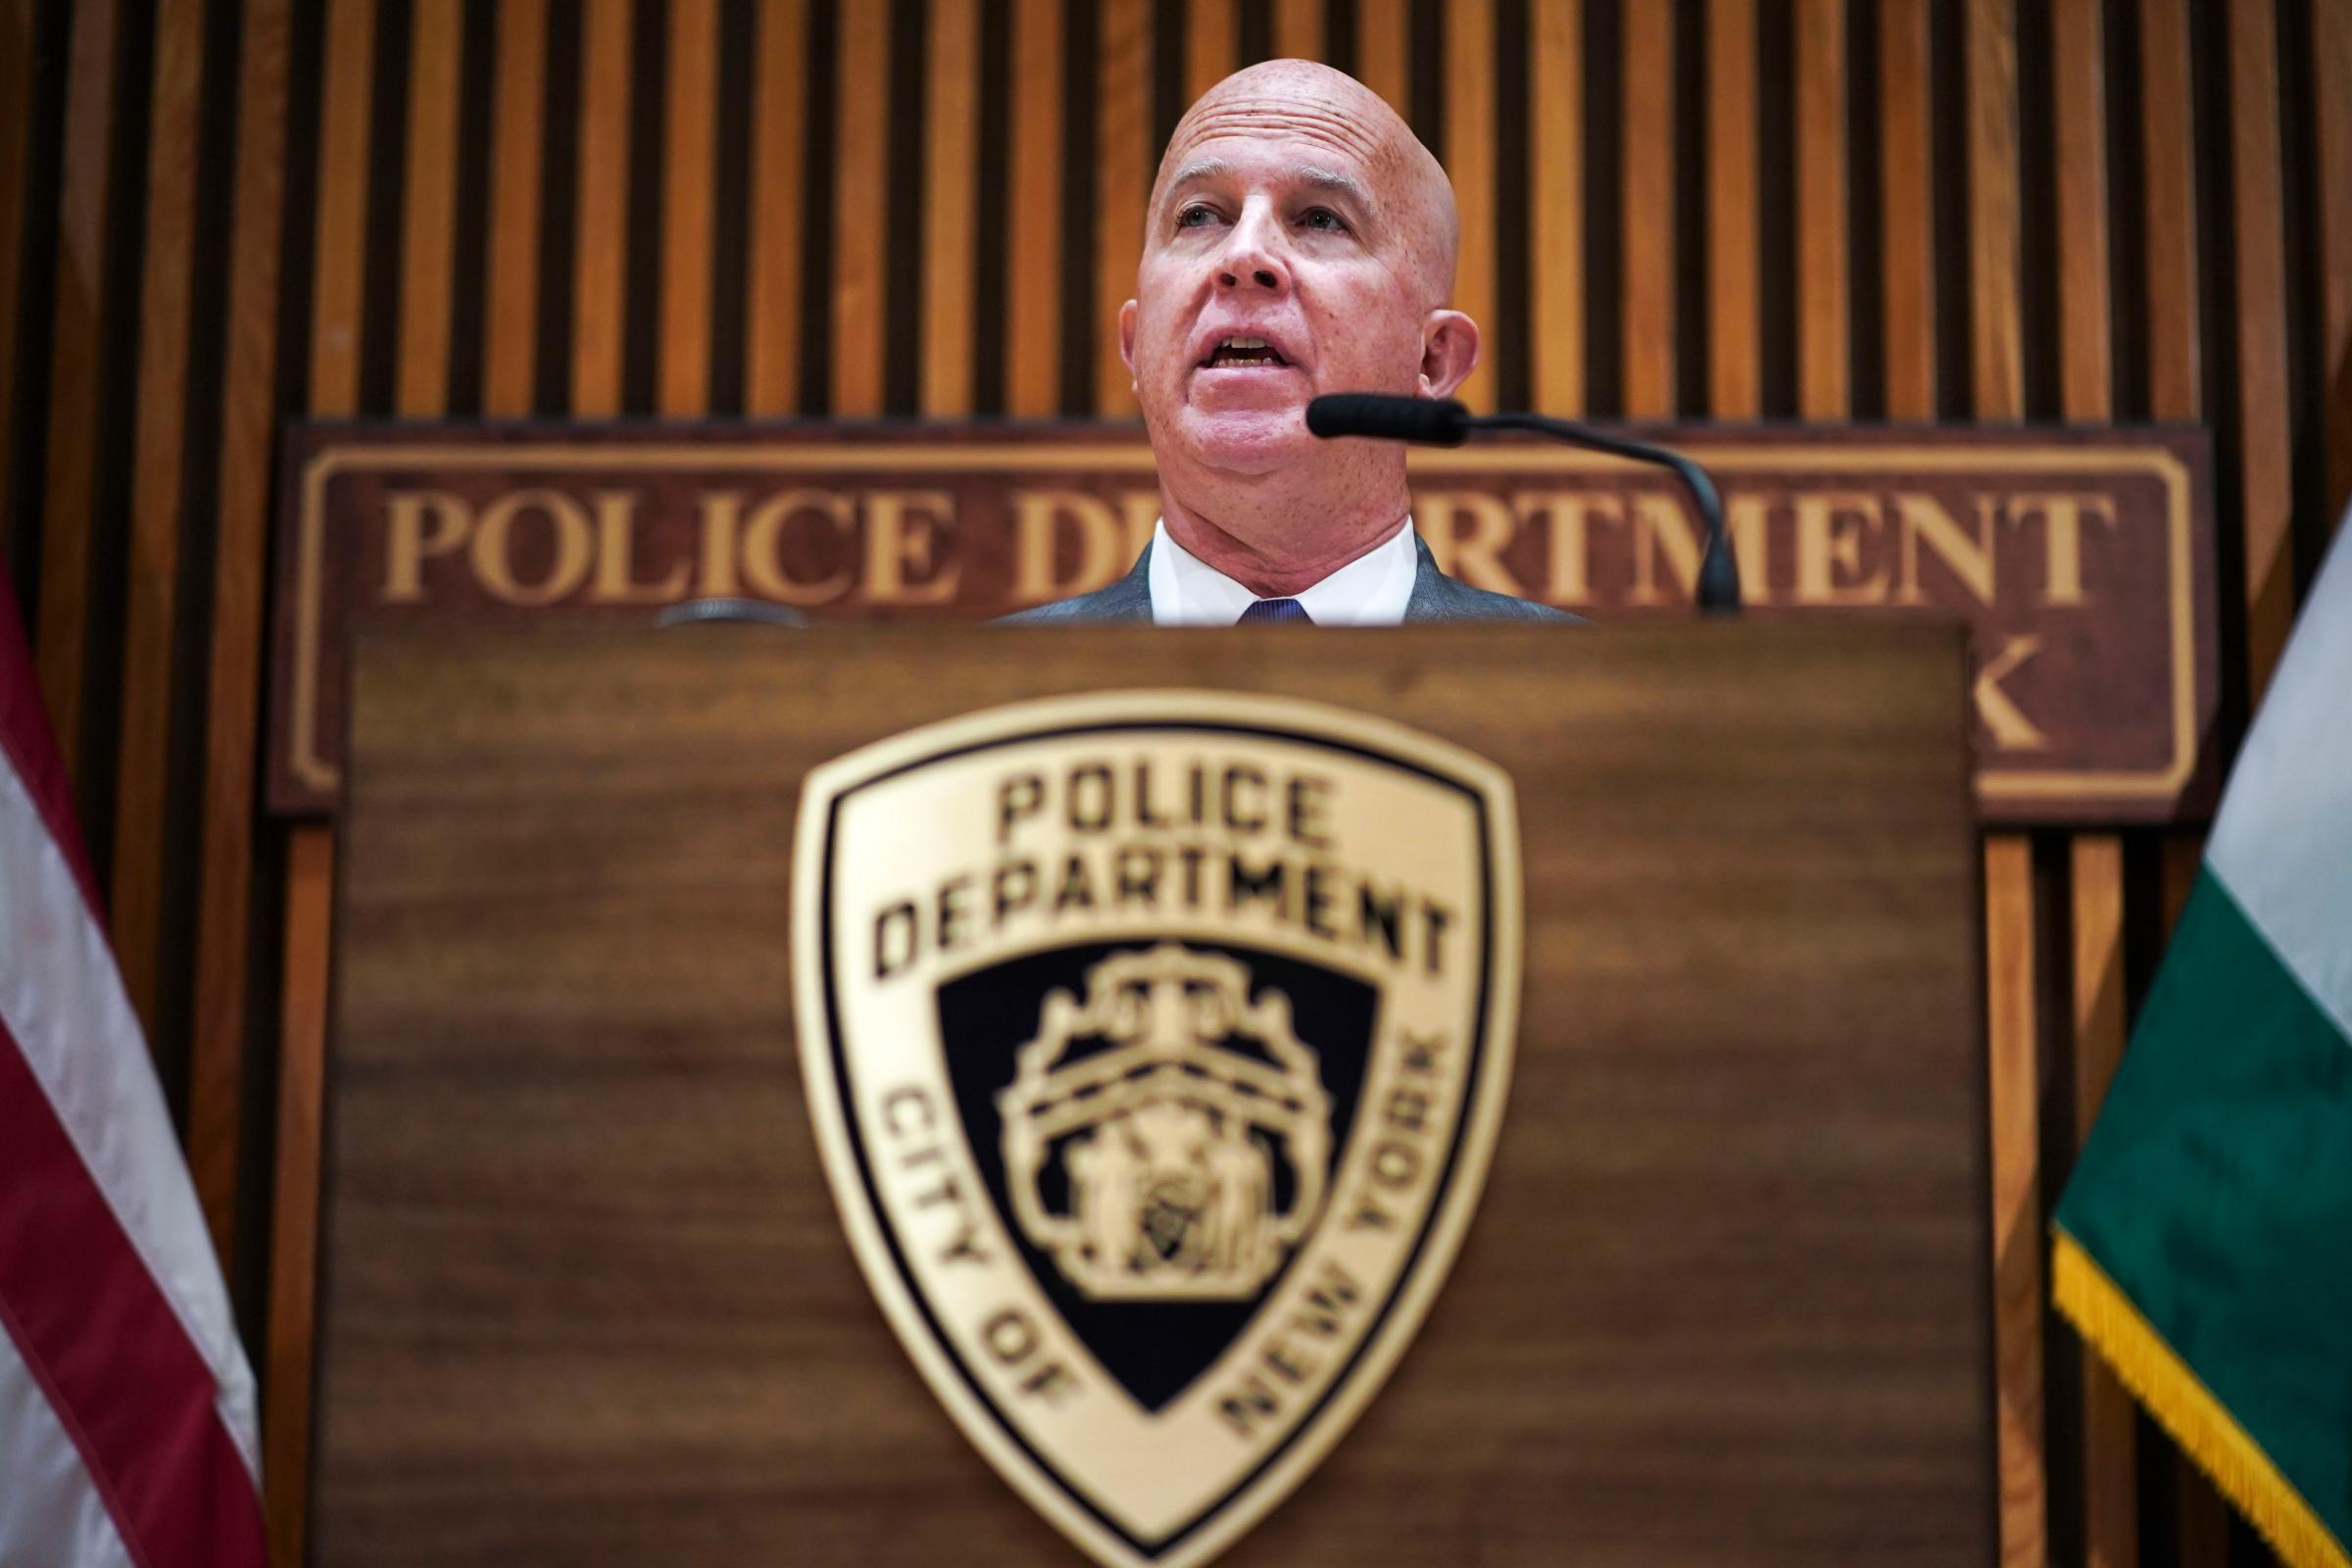 NYPD Announces Fate Of Cop Implicated In Chokehold Death Of Eric Garner